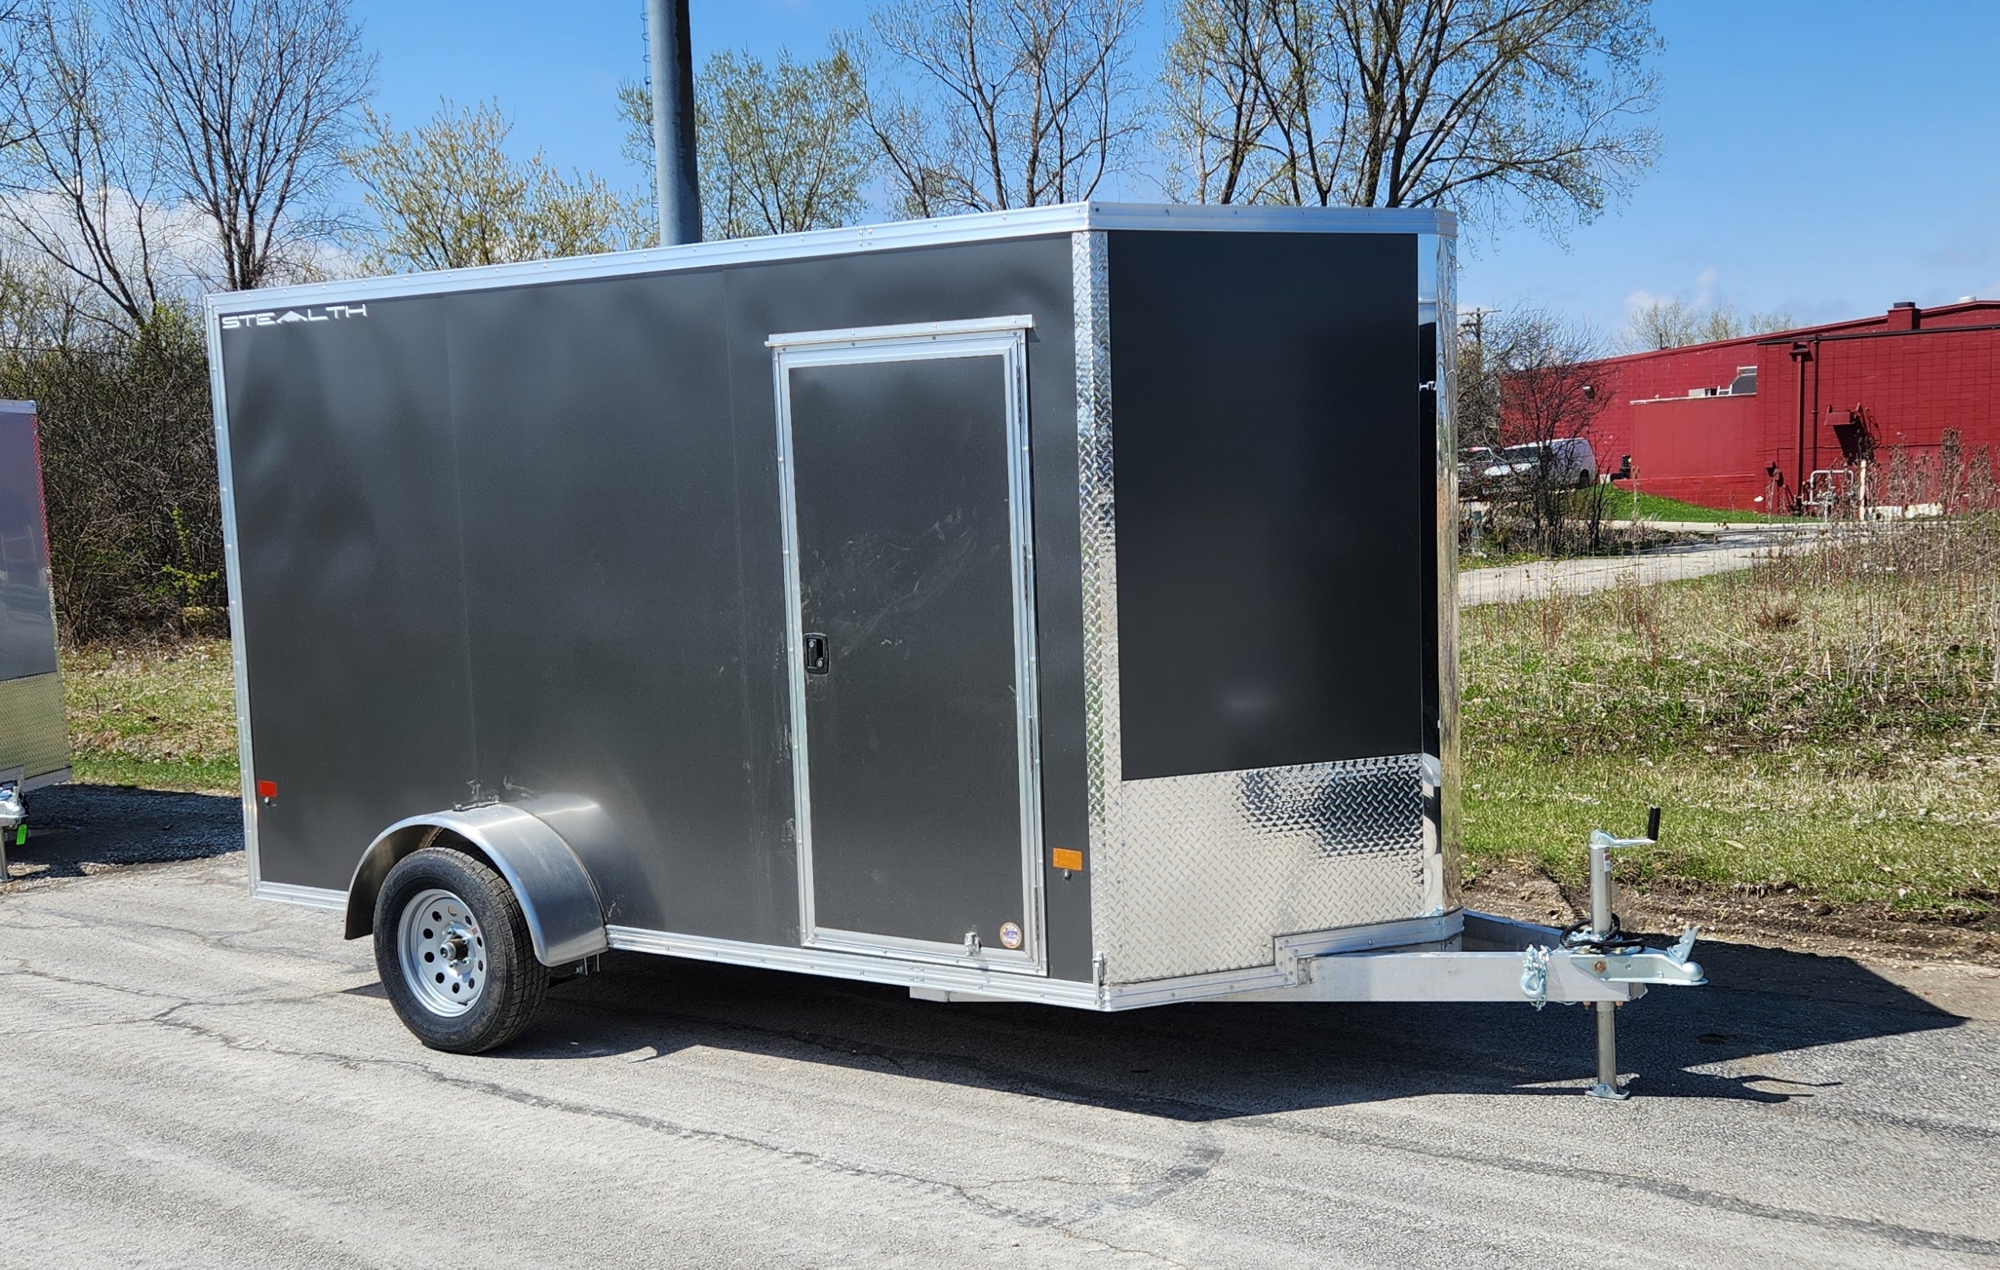 CargoPro Stealth 6x12 Aluminum Frame Single Axle Cargo Trailer w/ Ramp Door & 6" Extra Height - Charcoal